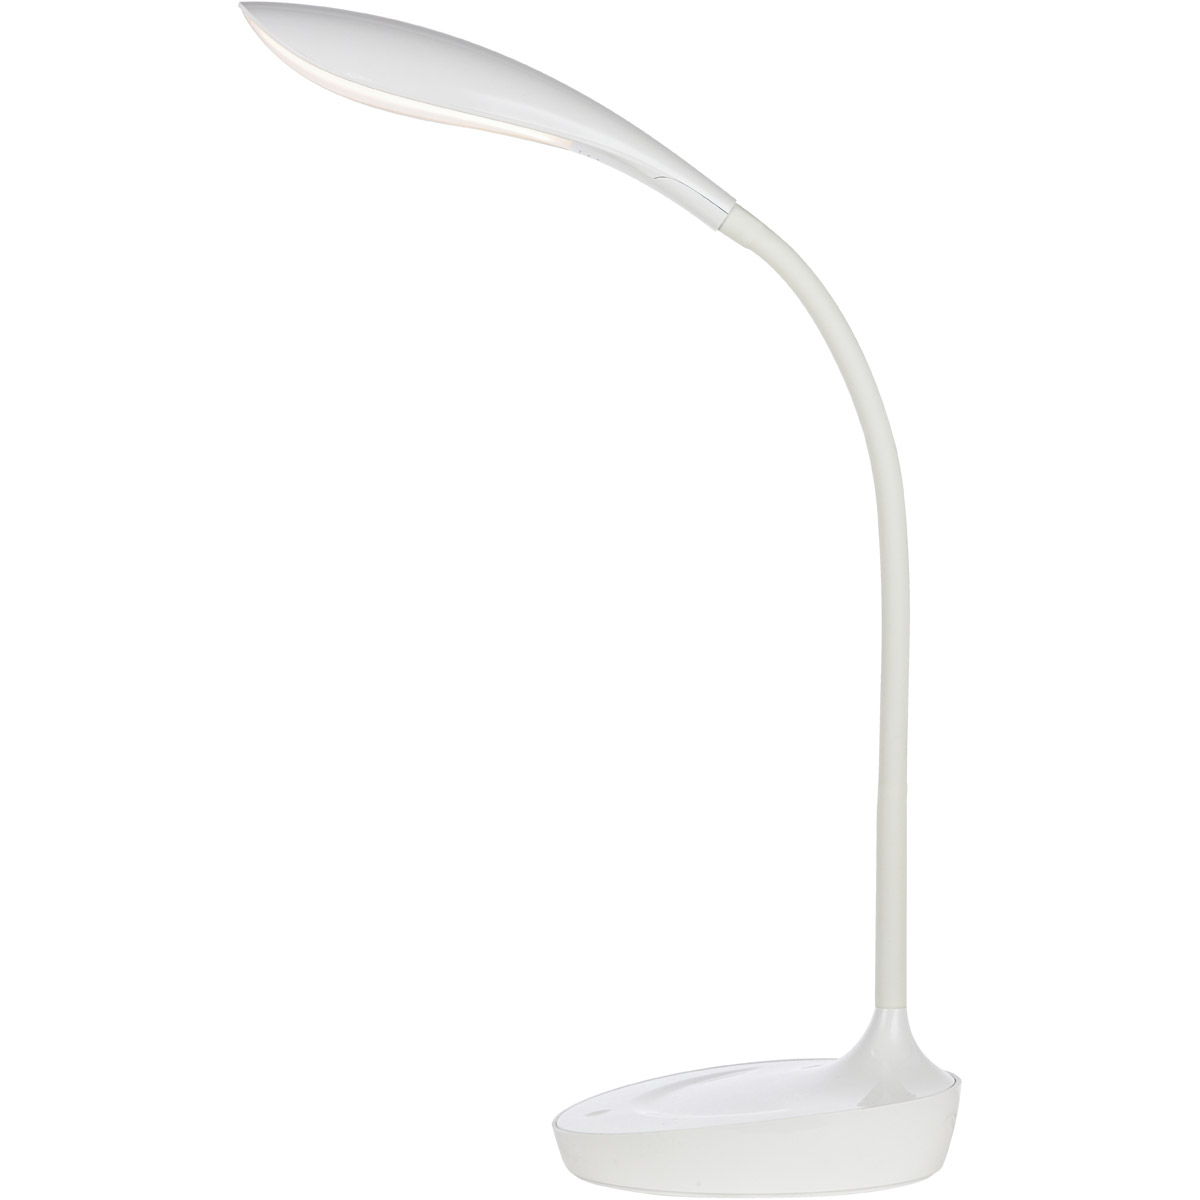 Ledds009 Sleek Led Desk Lamp With Smooth Touch Dimmer & Usb, Glossywhite